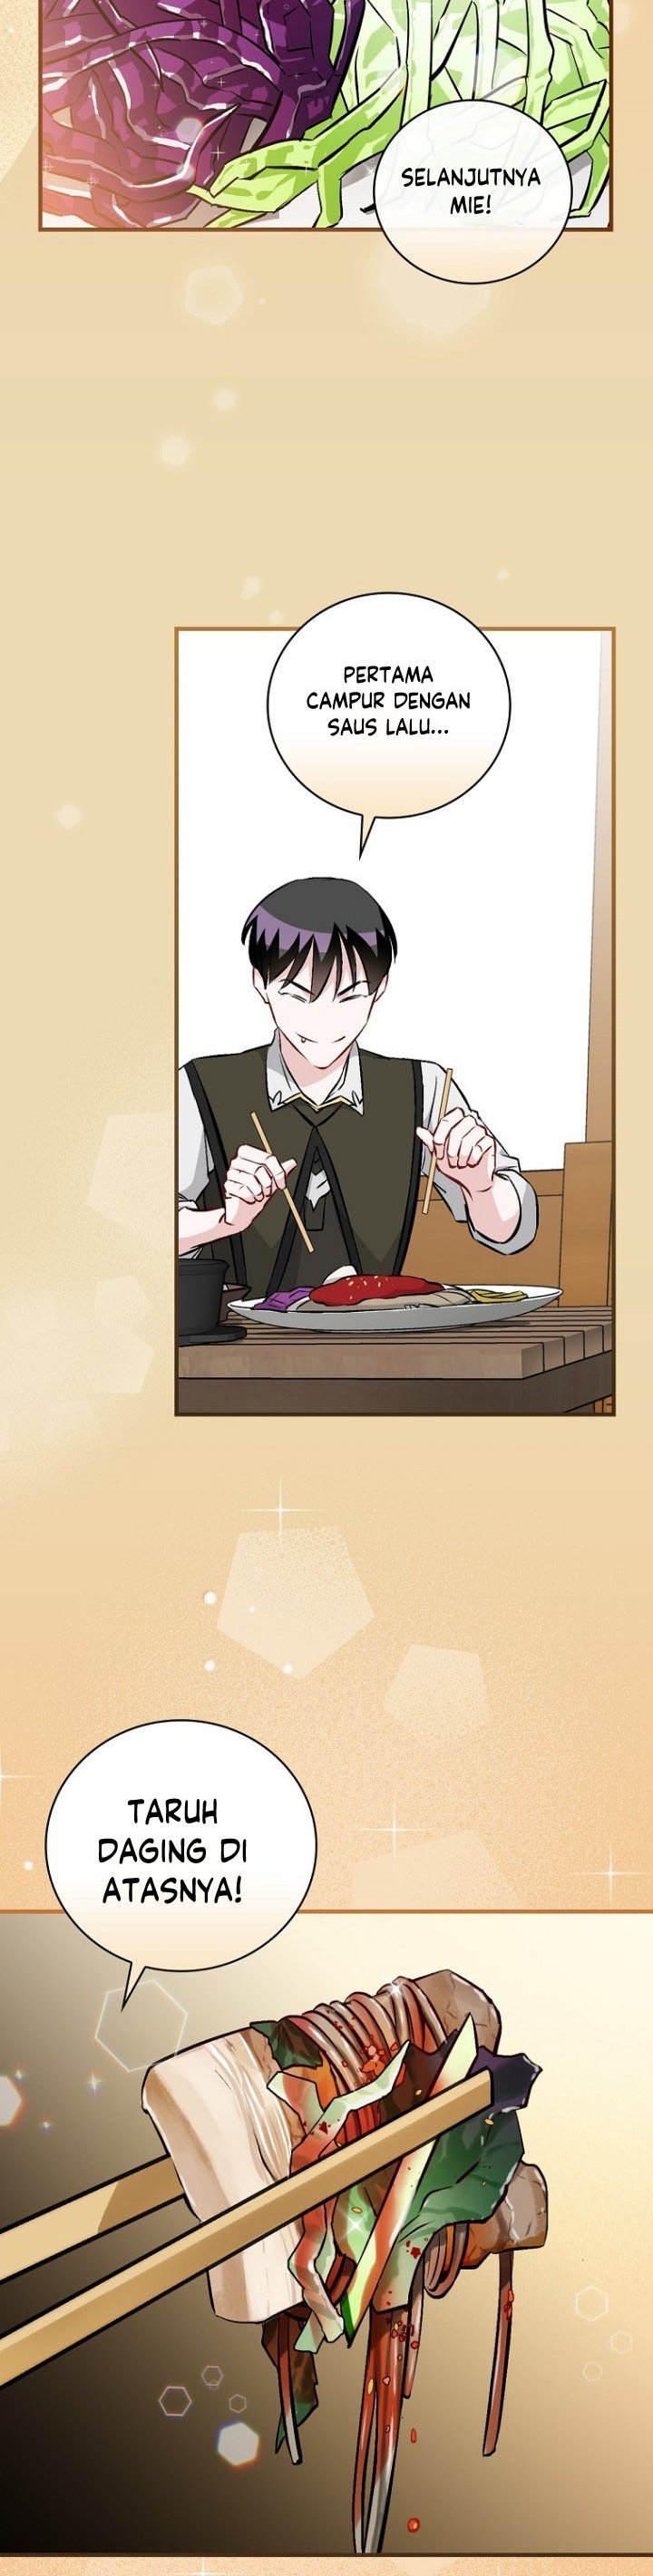 Leveling Up, By Only Eating! (Gourmet Gaming) Chapter 122 - 237